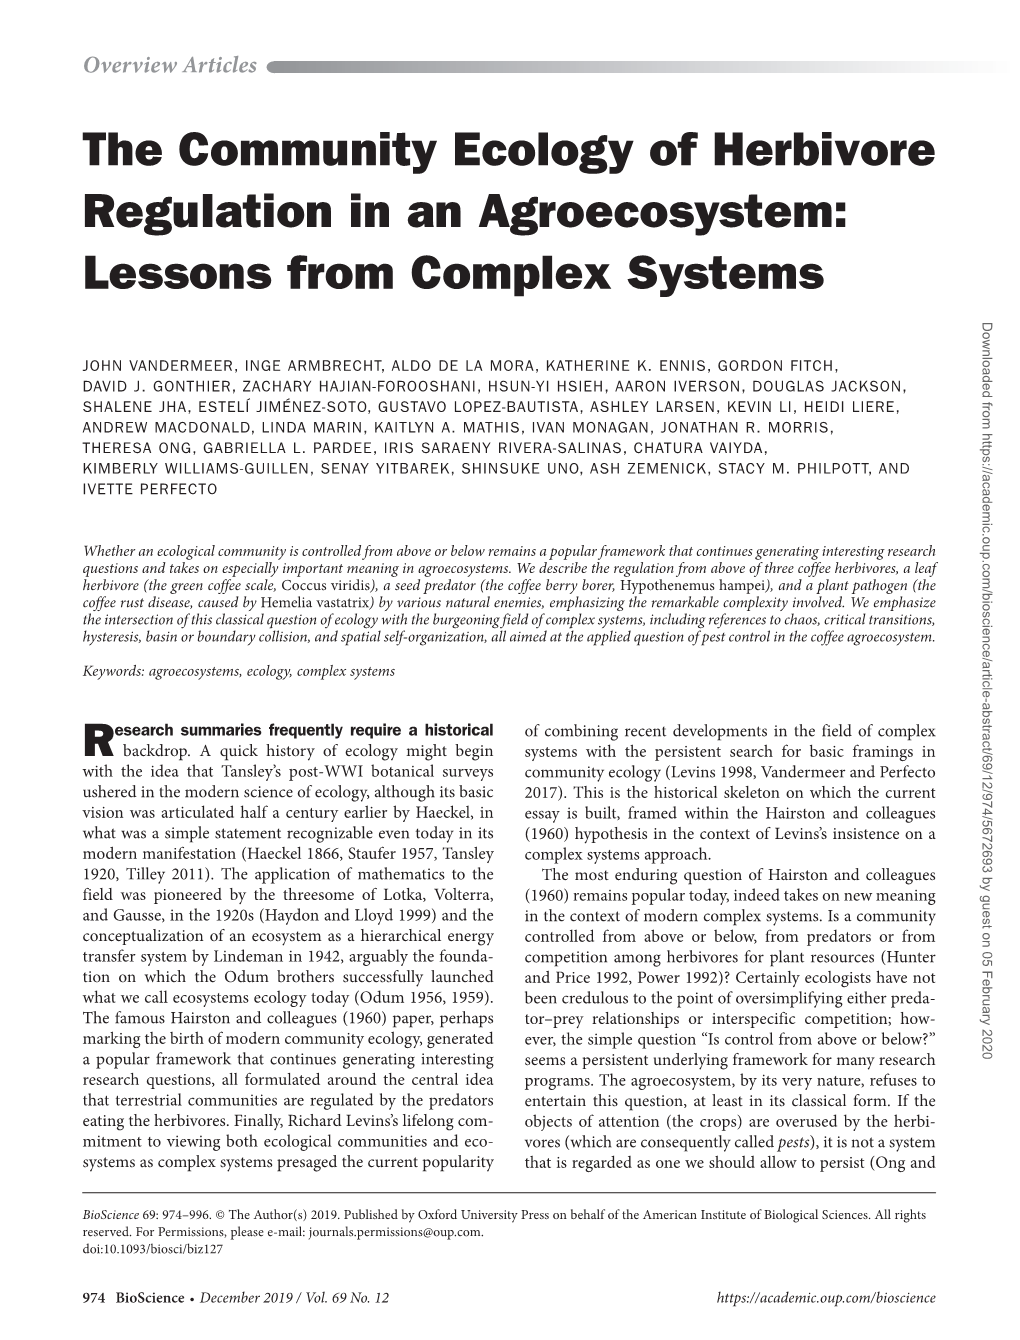 The Community Ecology of Herbivore Regulation in an Agroecosystem